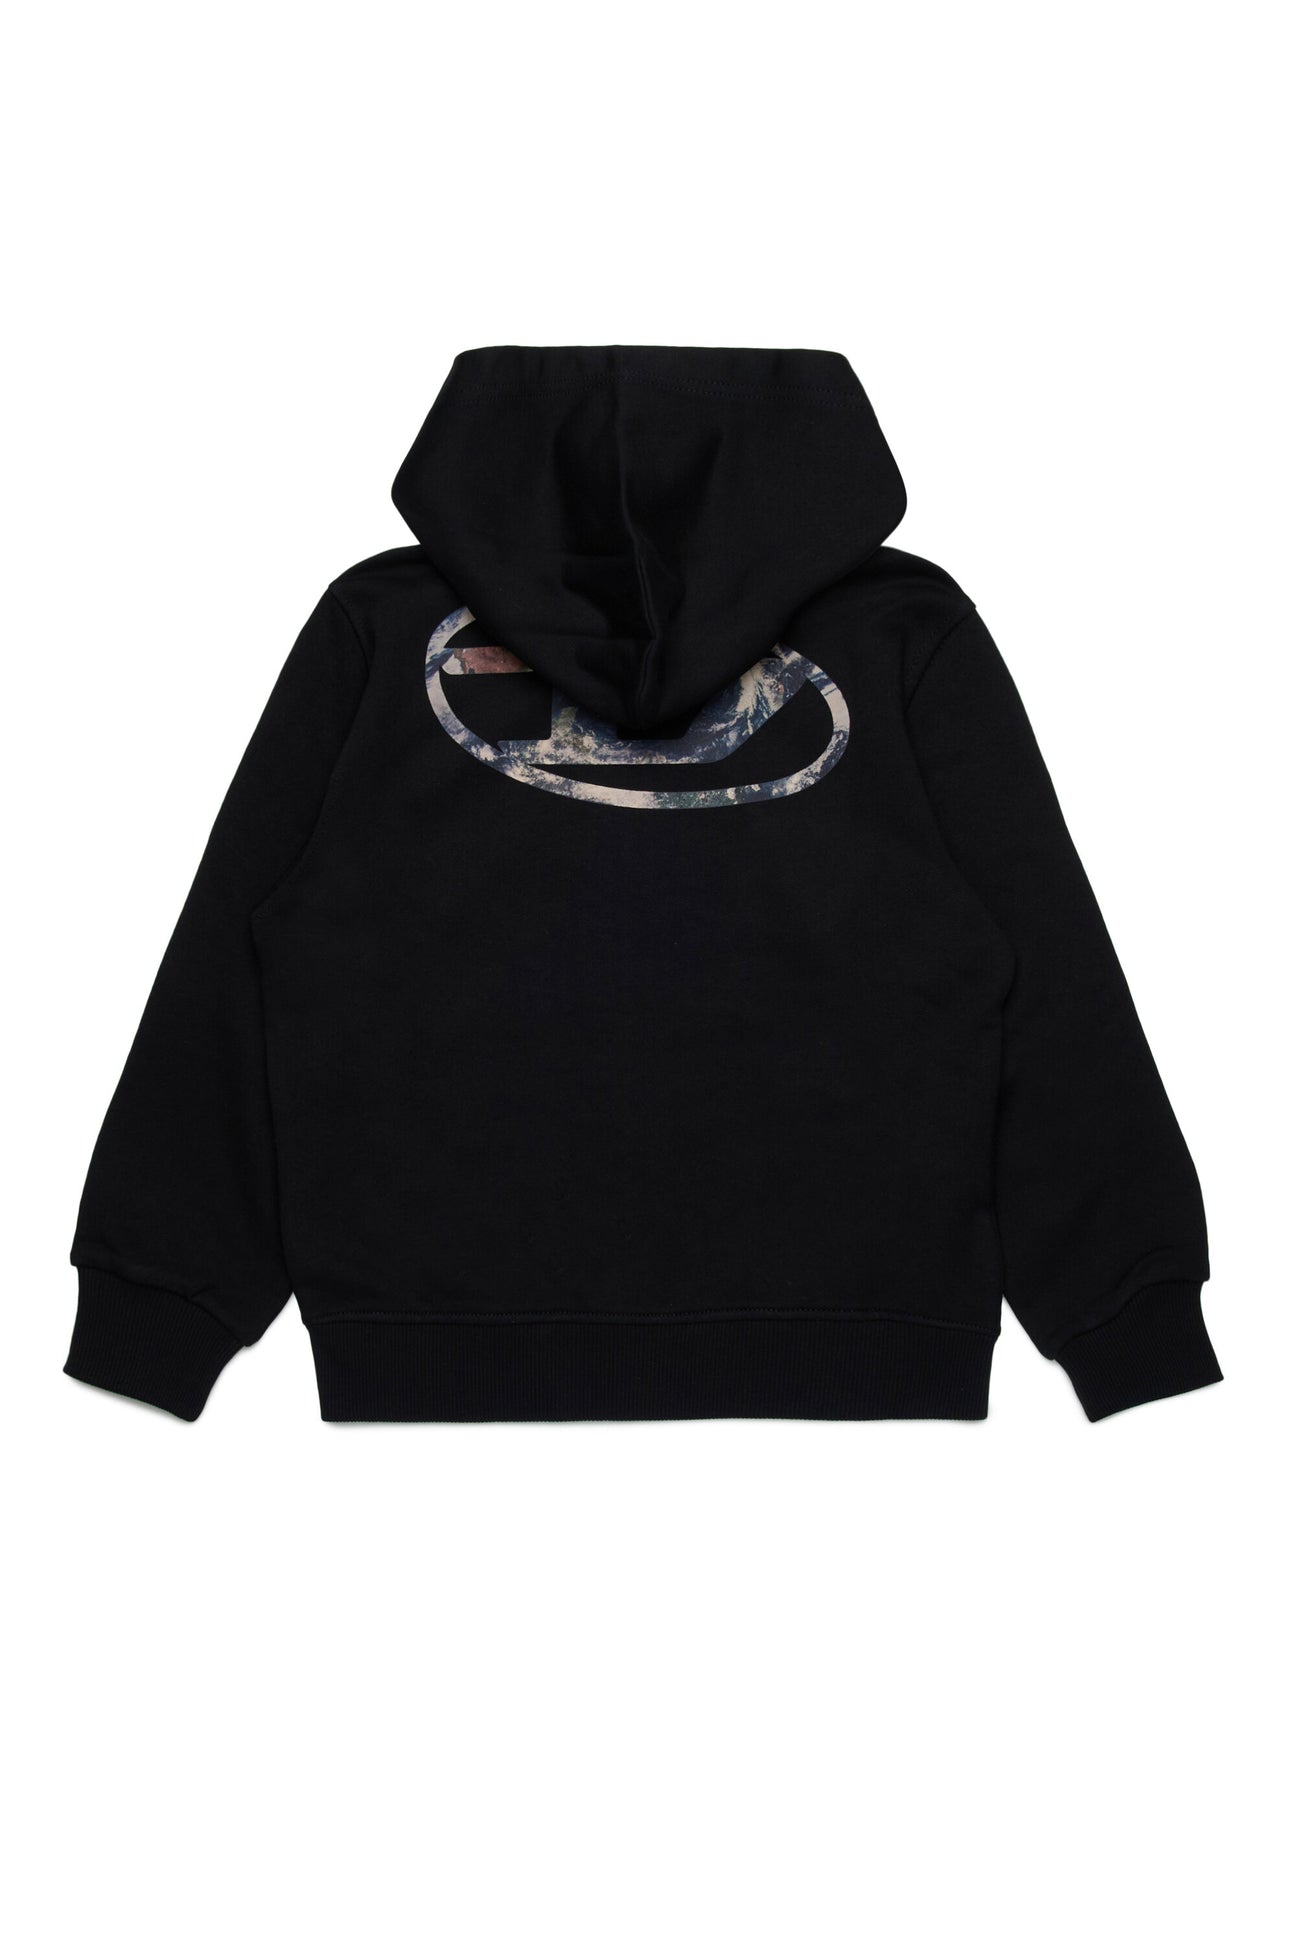 Hooded sweatshirt with oval D Planet Camou logo Hooded sweatshirt with oval D Planet Camou logo